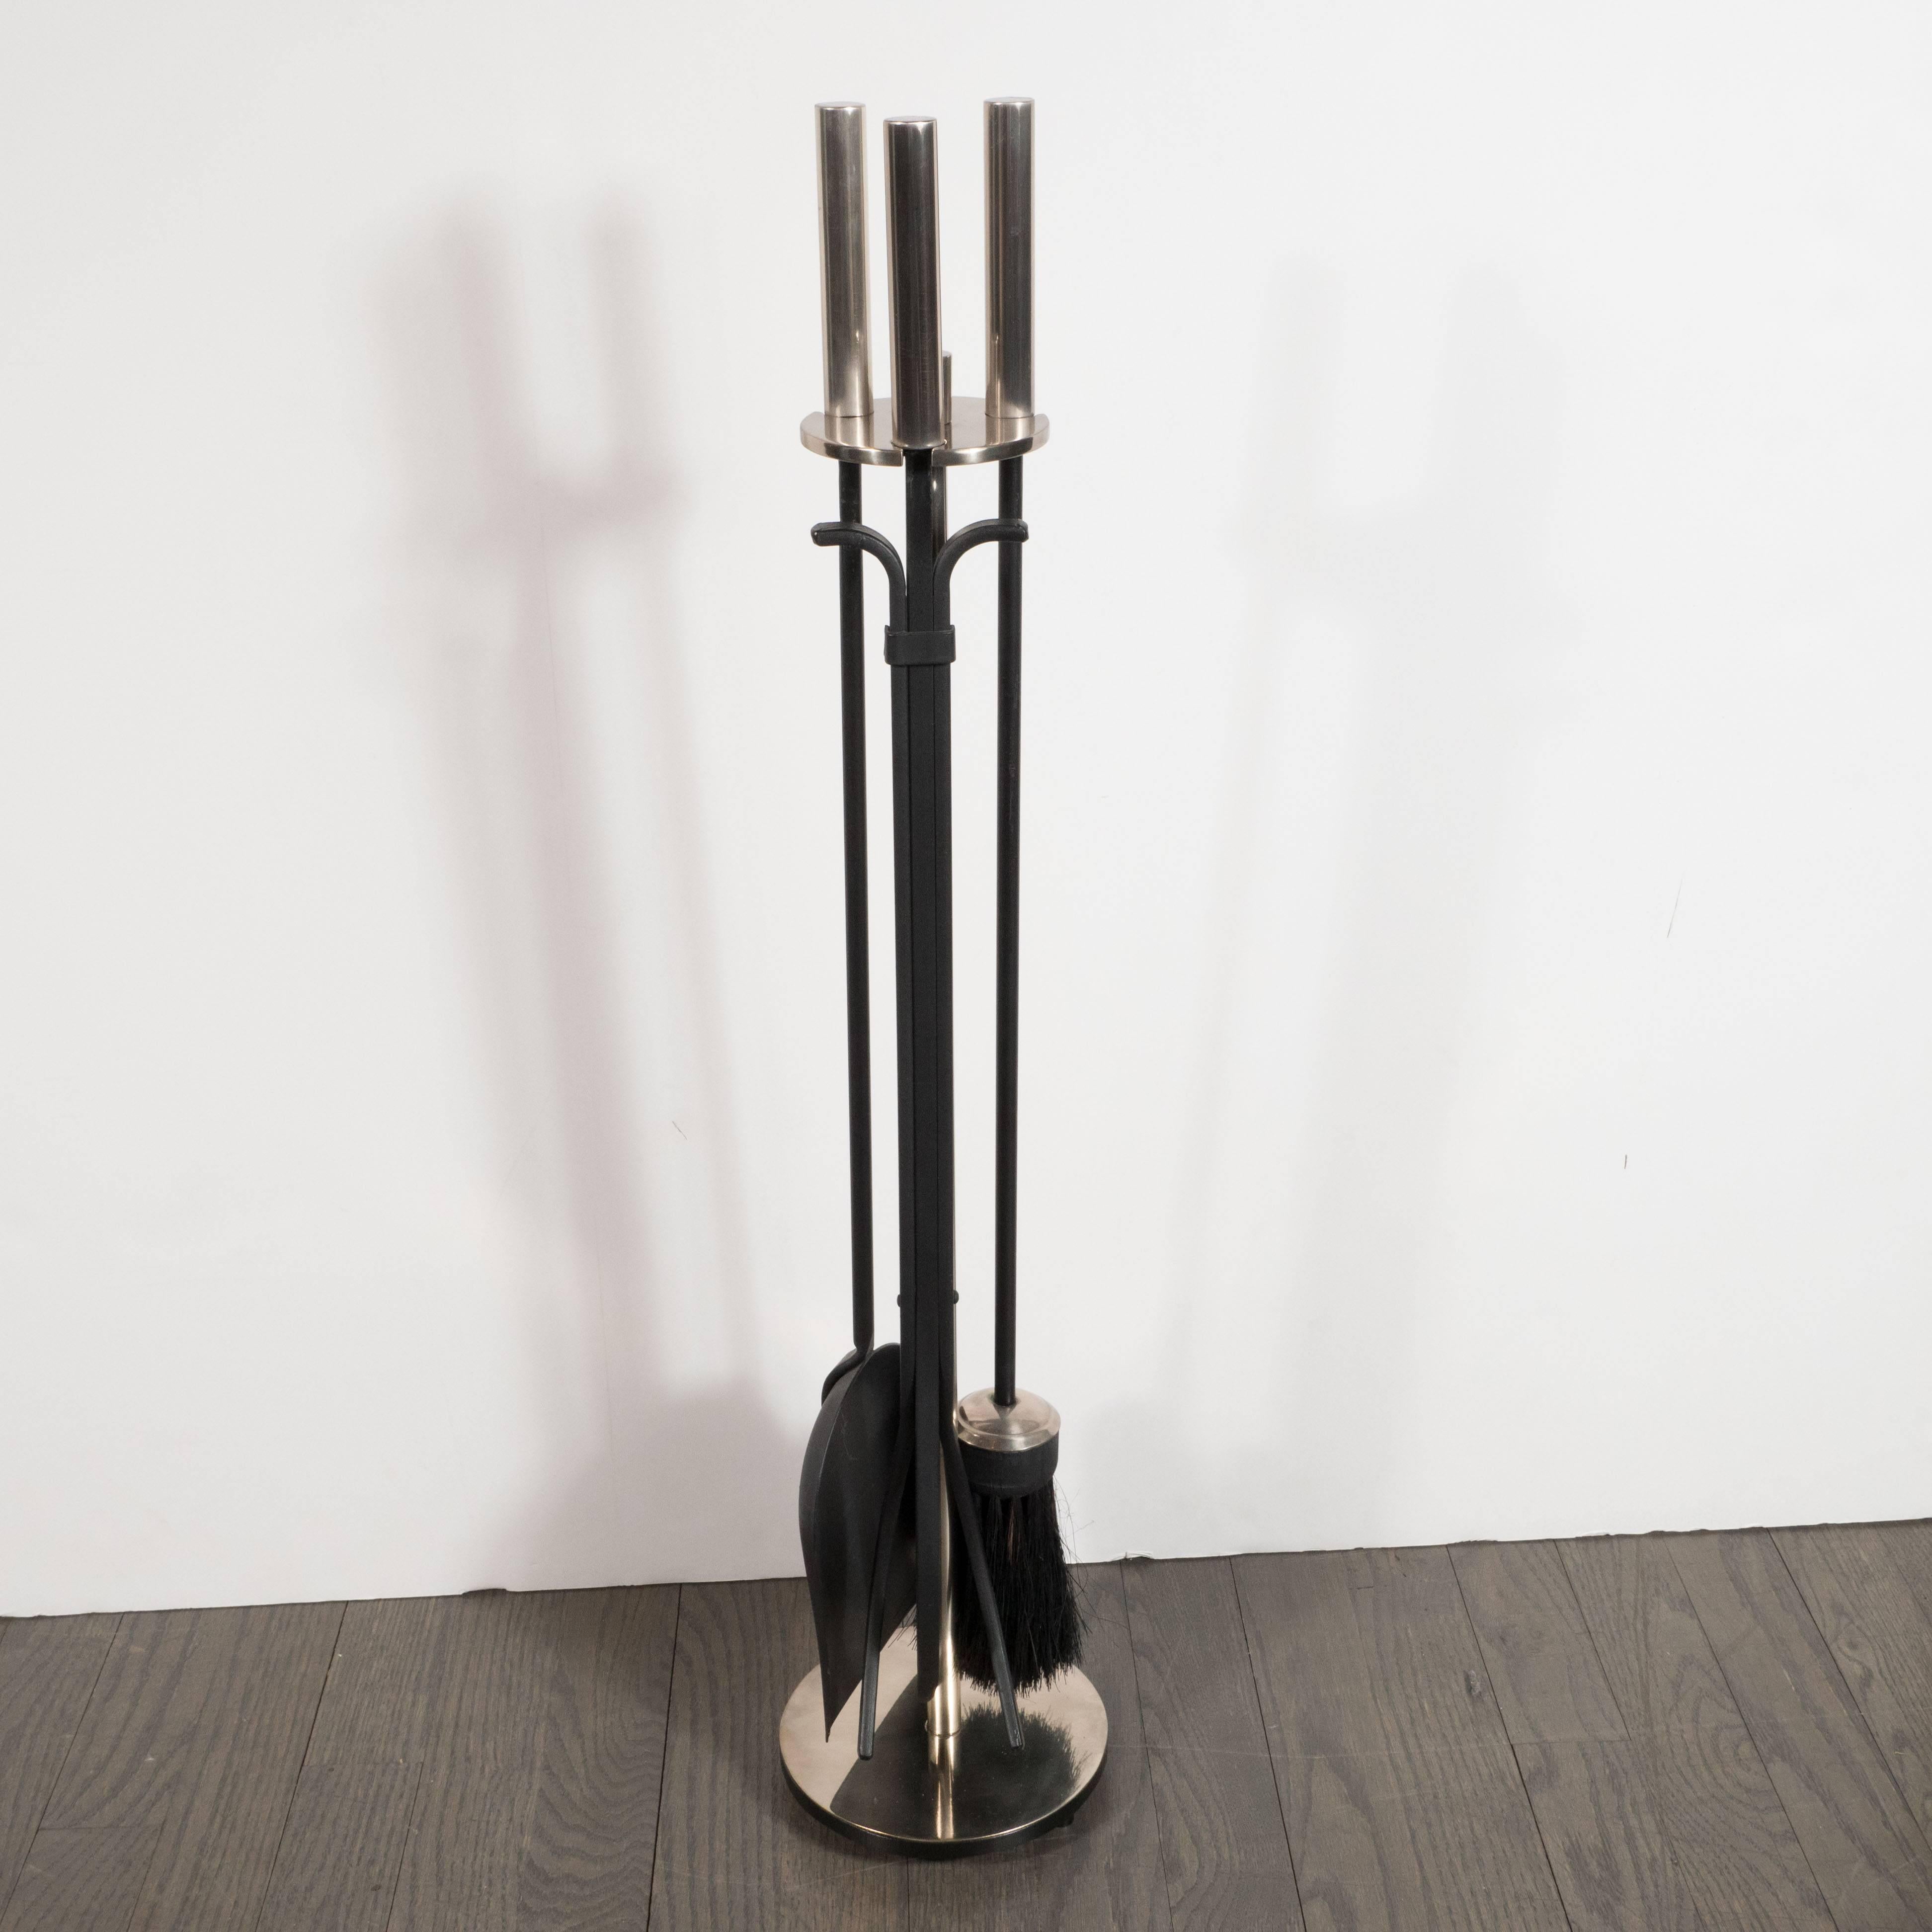 This handsome modernist four-piece fire tools set was realized by the renowned New York based fireplace tool company William H. Jackson, founded in 1827. Secured by a matte nickel stand with a cylindrical rod ascending from a circular base, it